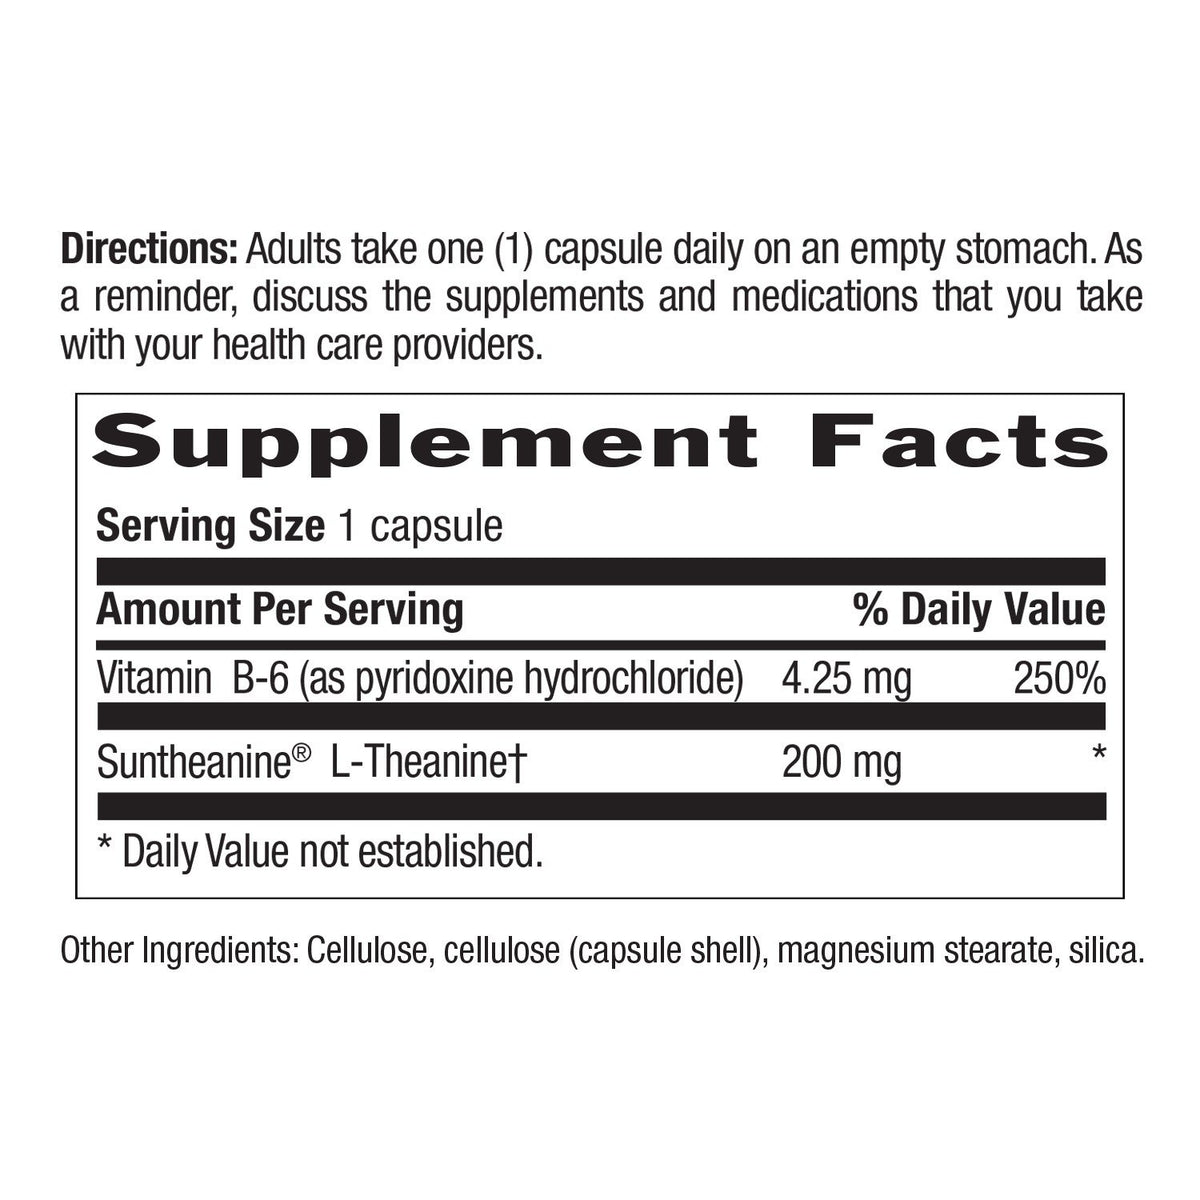 Country Life L-Theanine 200 mg 60 VegCap